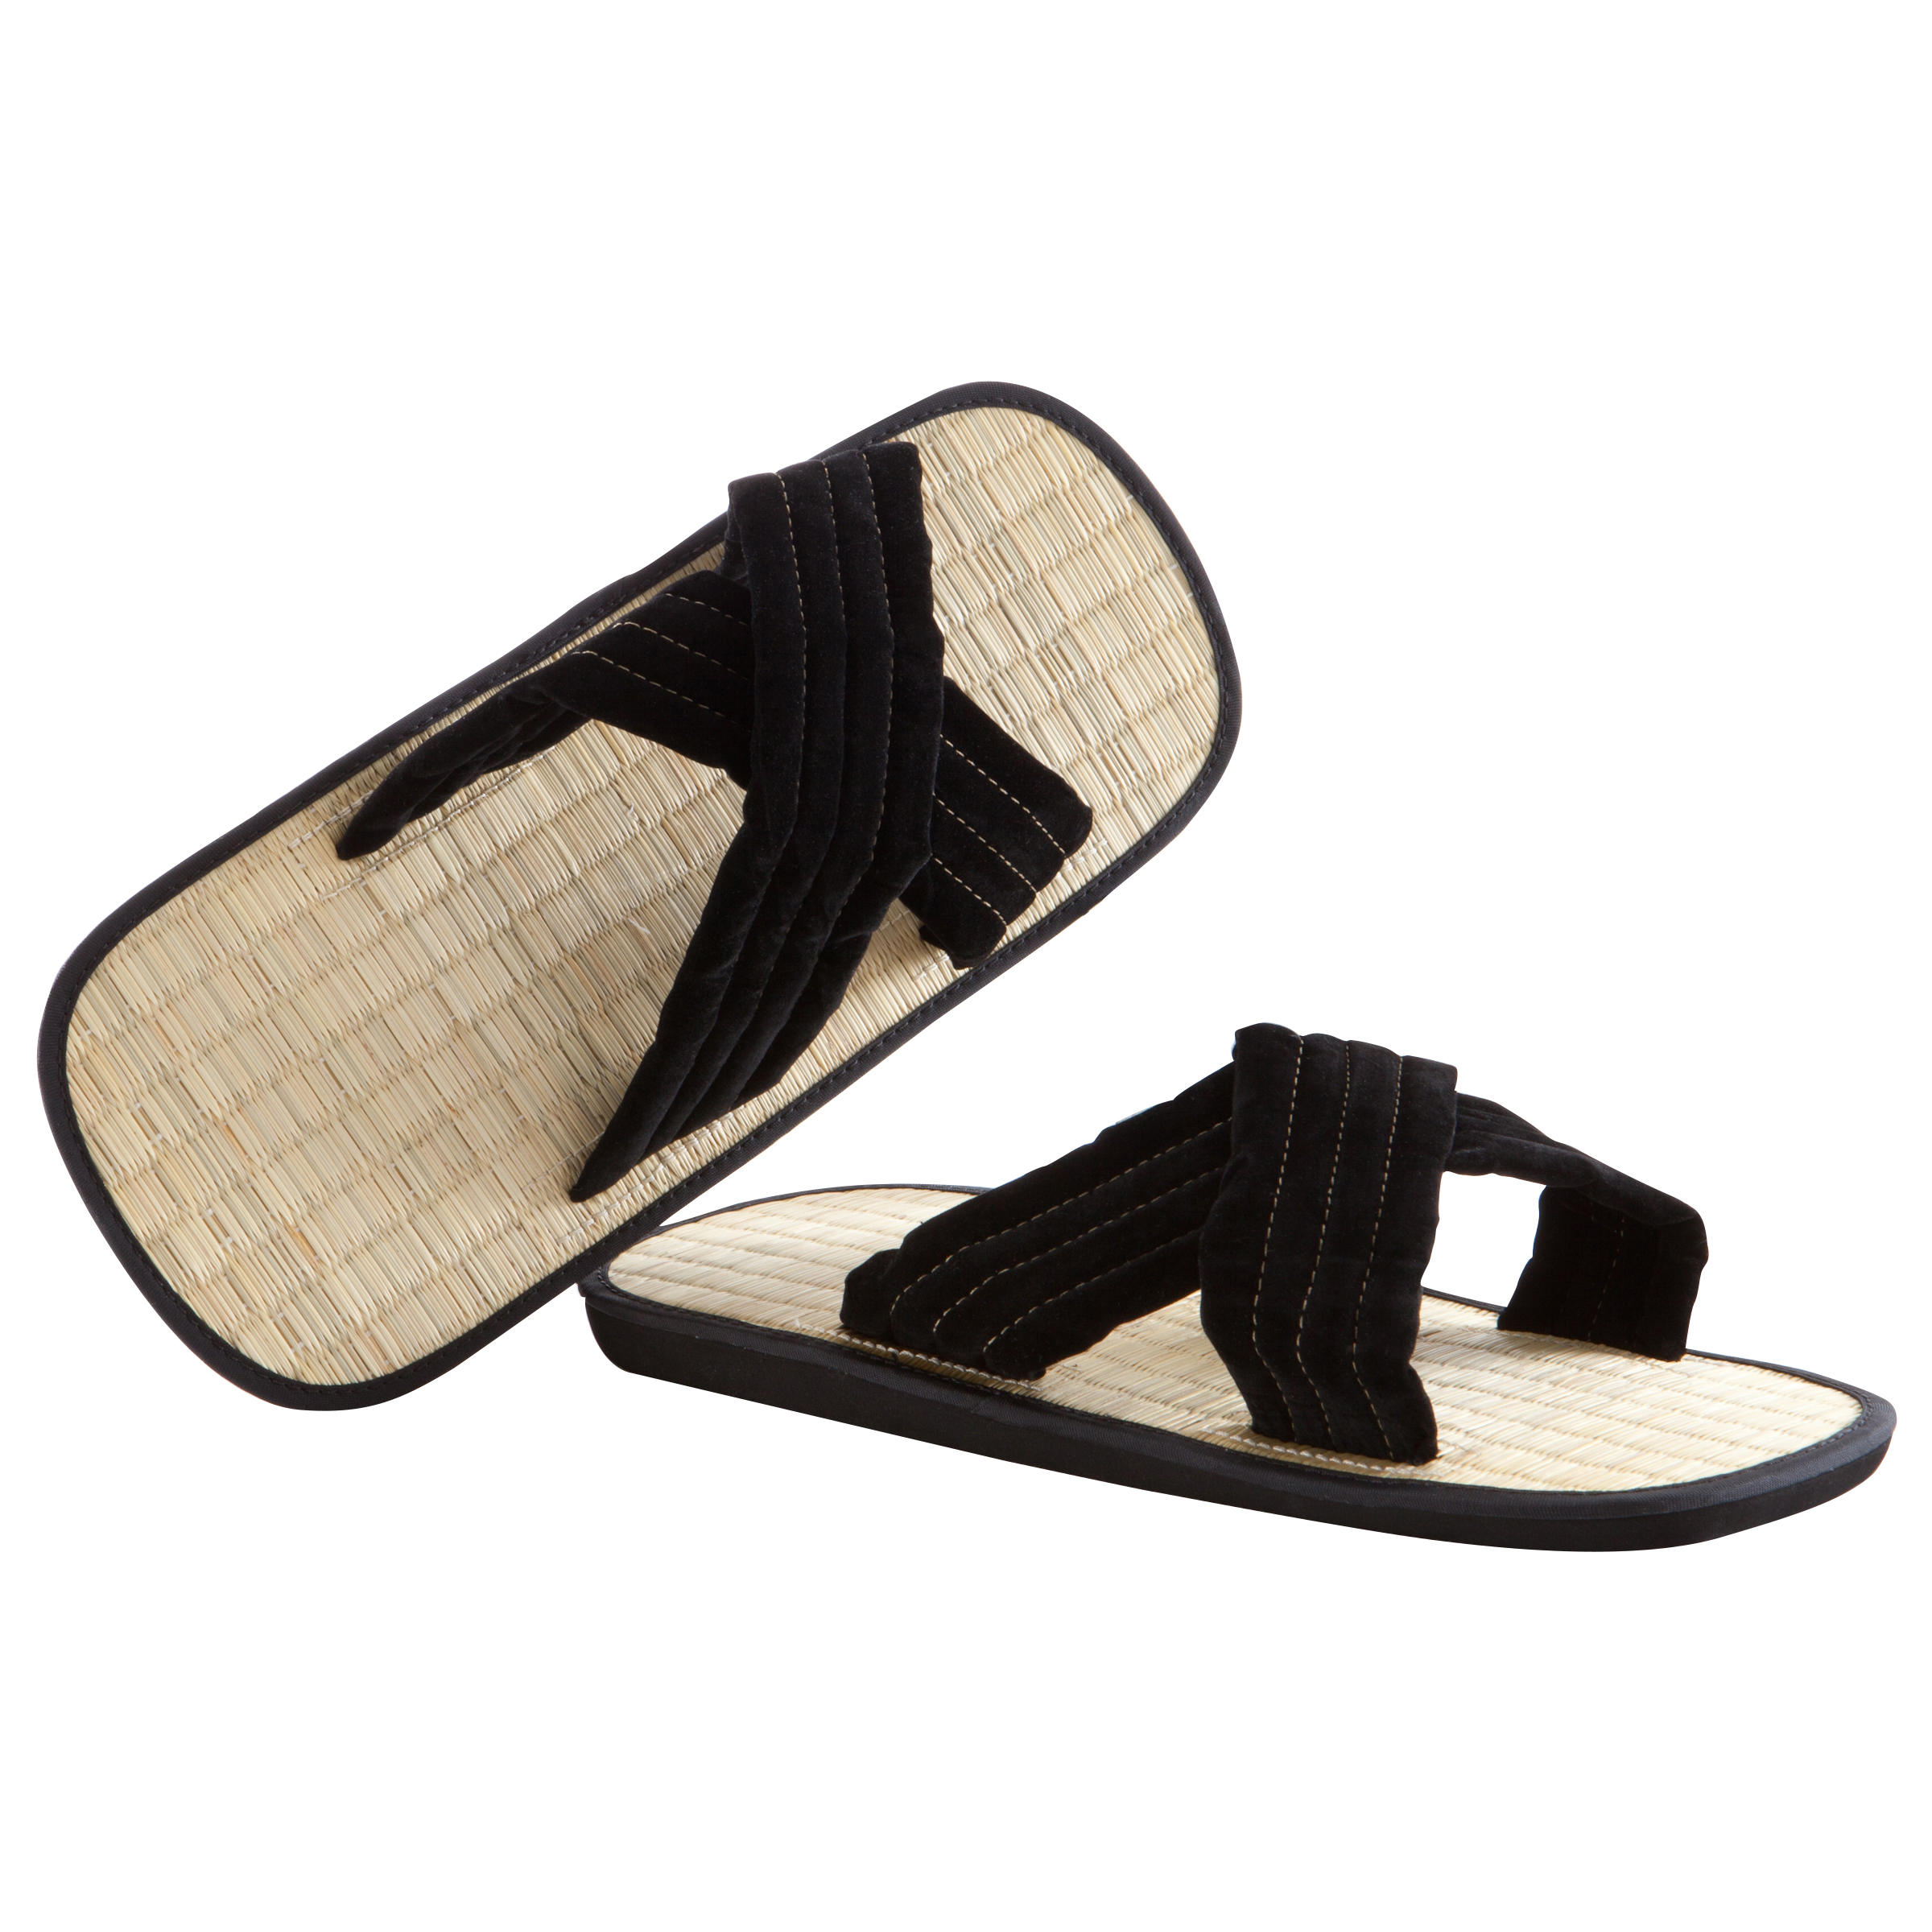 Kids' and Adult Martial Arts Zori Sandals 2/12